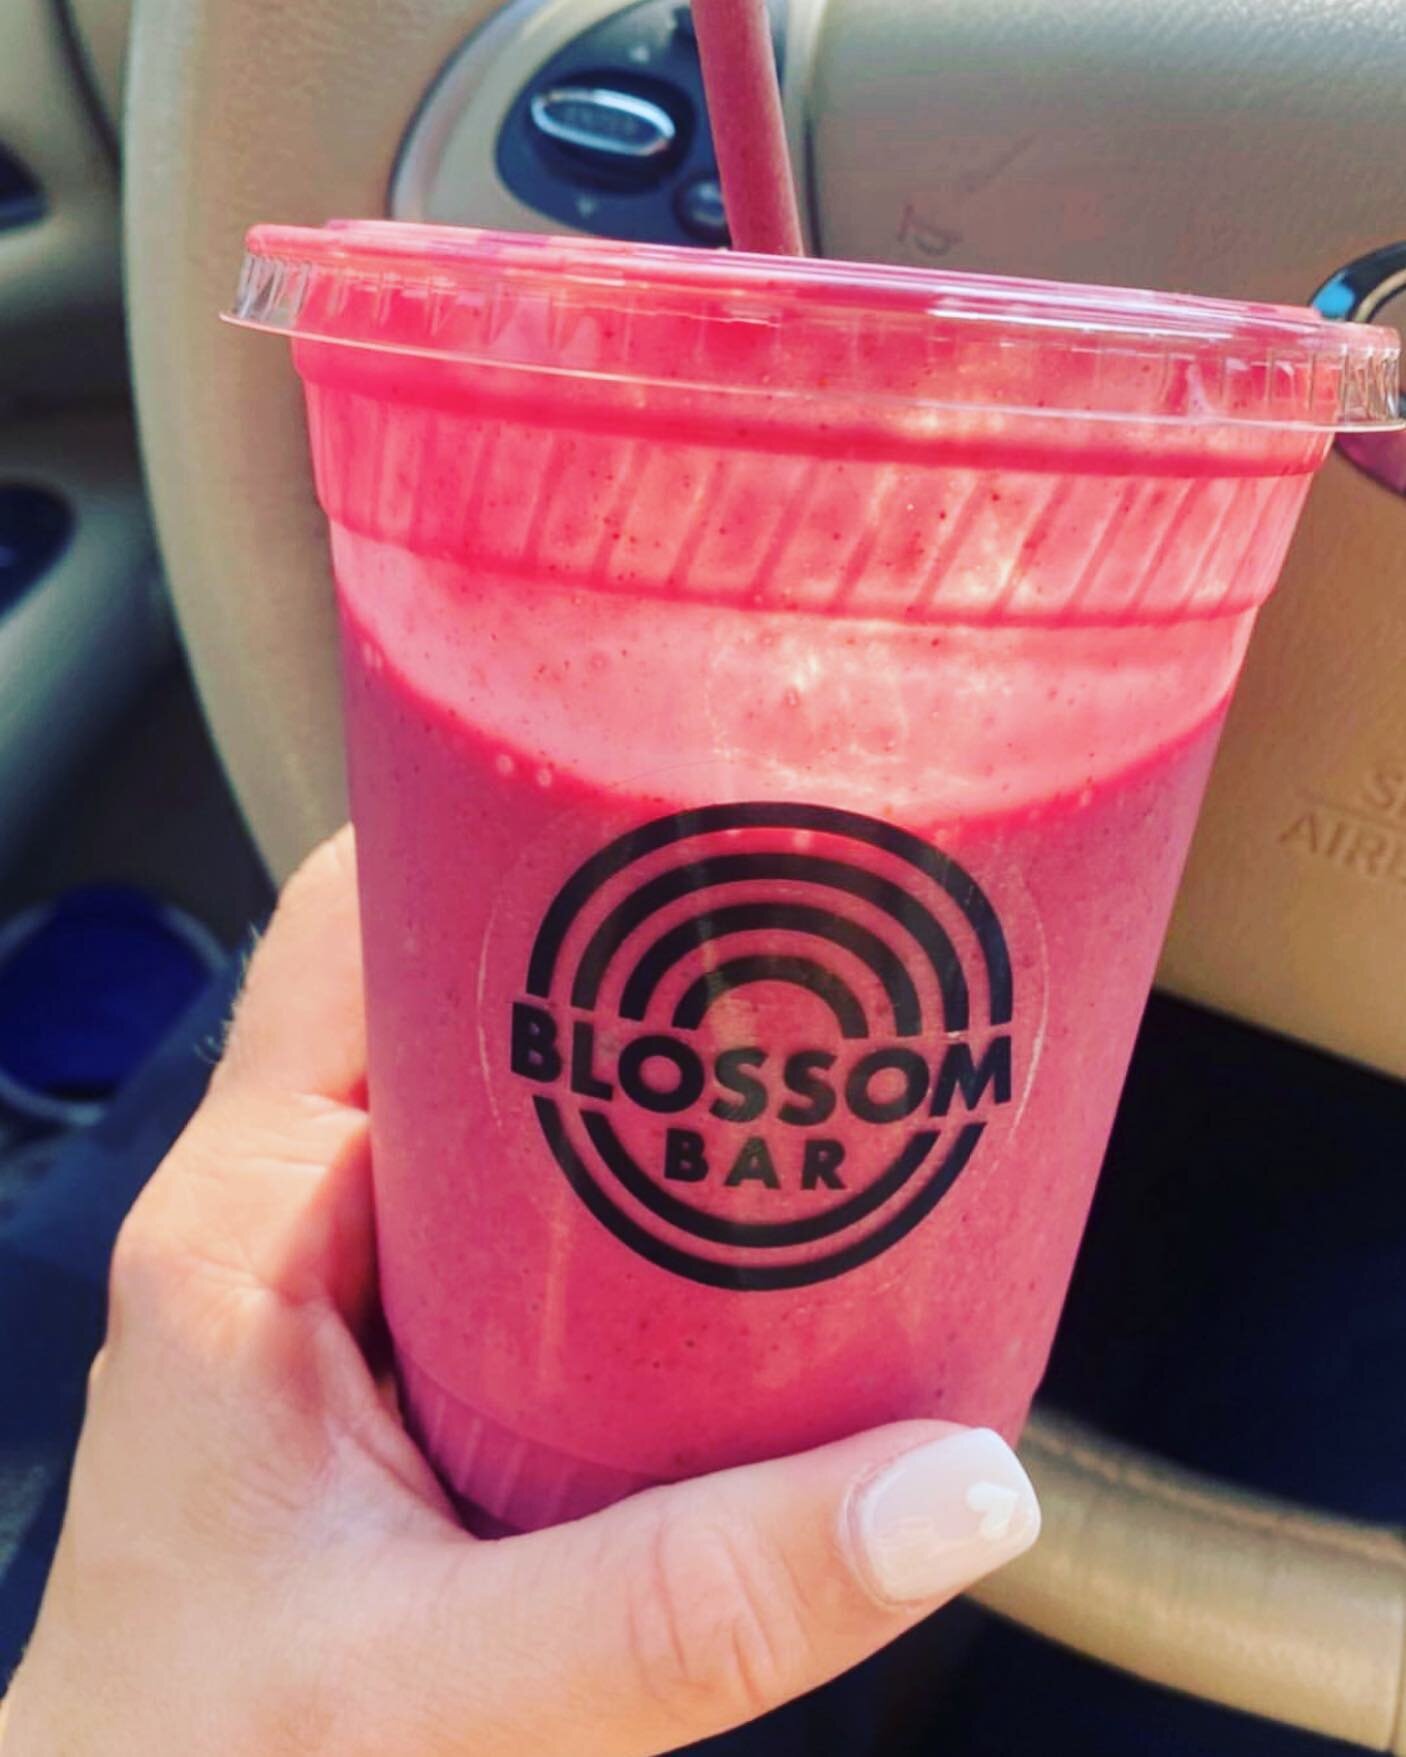 Post-workout fuel makes for a great day! 💪